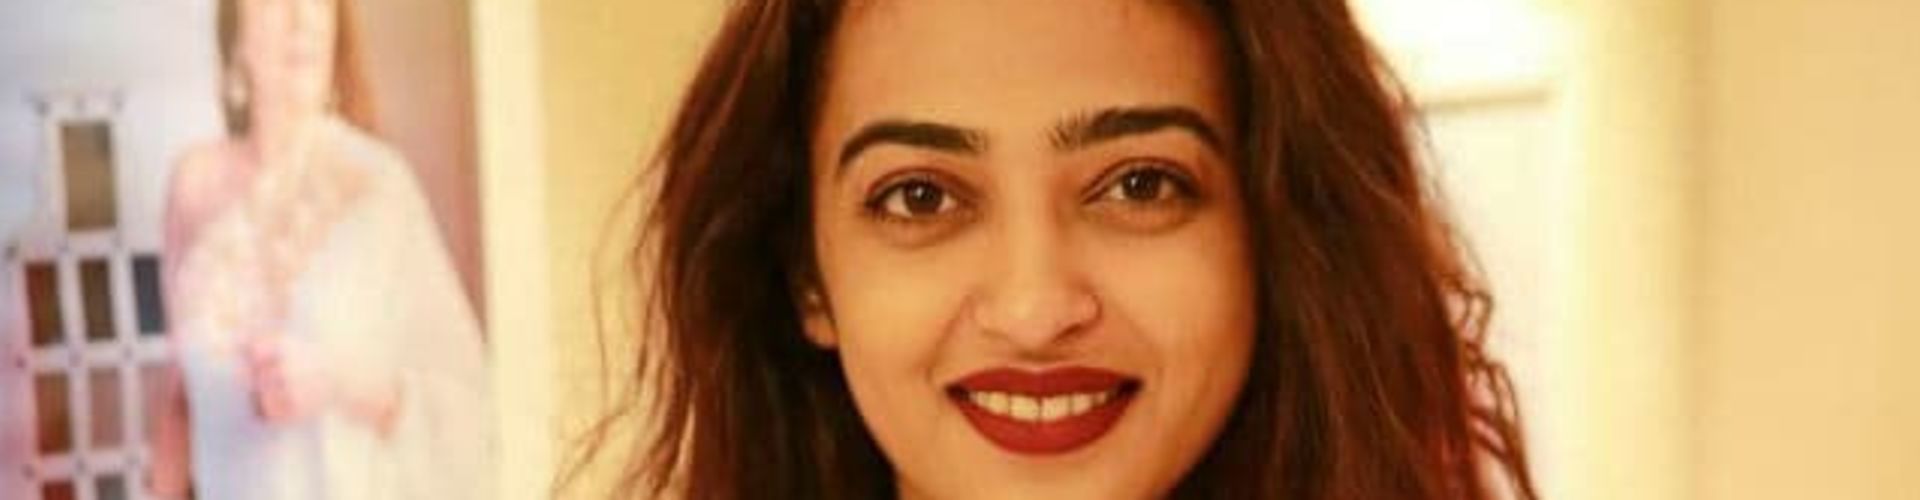 Most of the times it is difficult to break into film industry says Radhika Apte